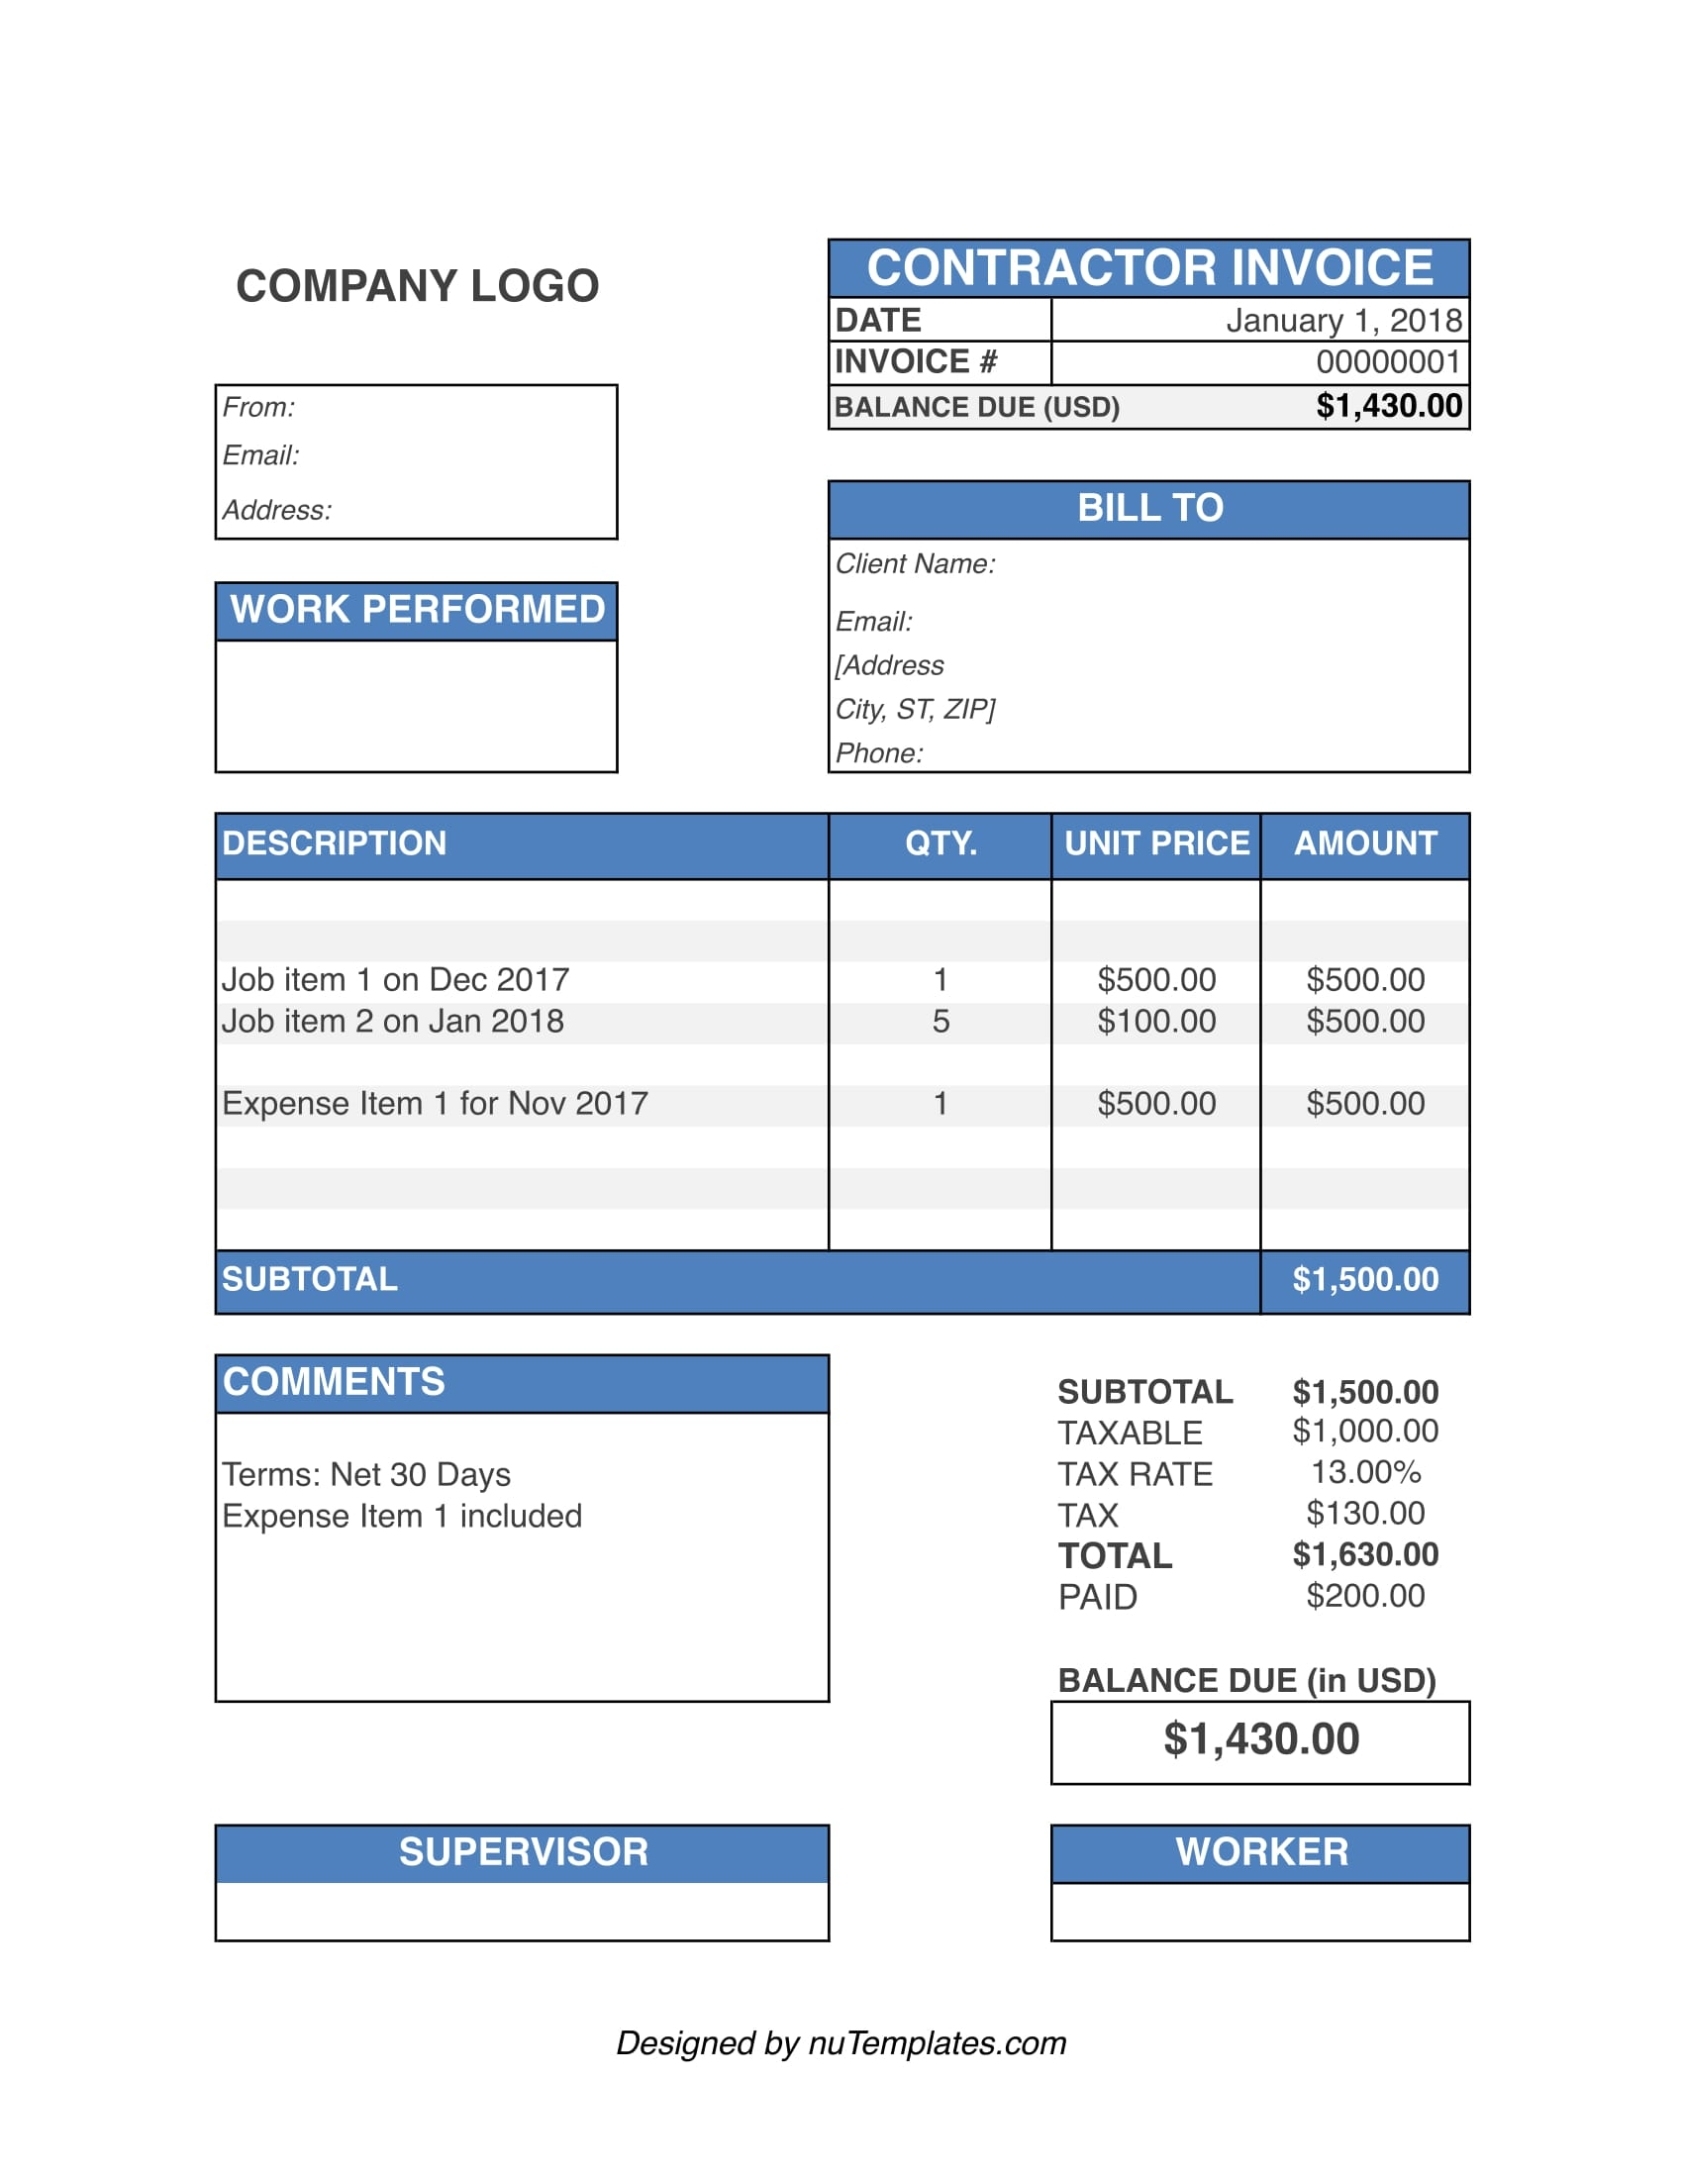 Contractor Invoice Template – Contractor Invoices | Nutemplates With Image Of Invoice Template